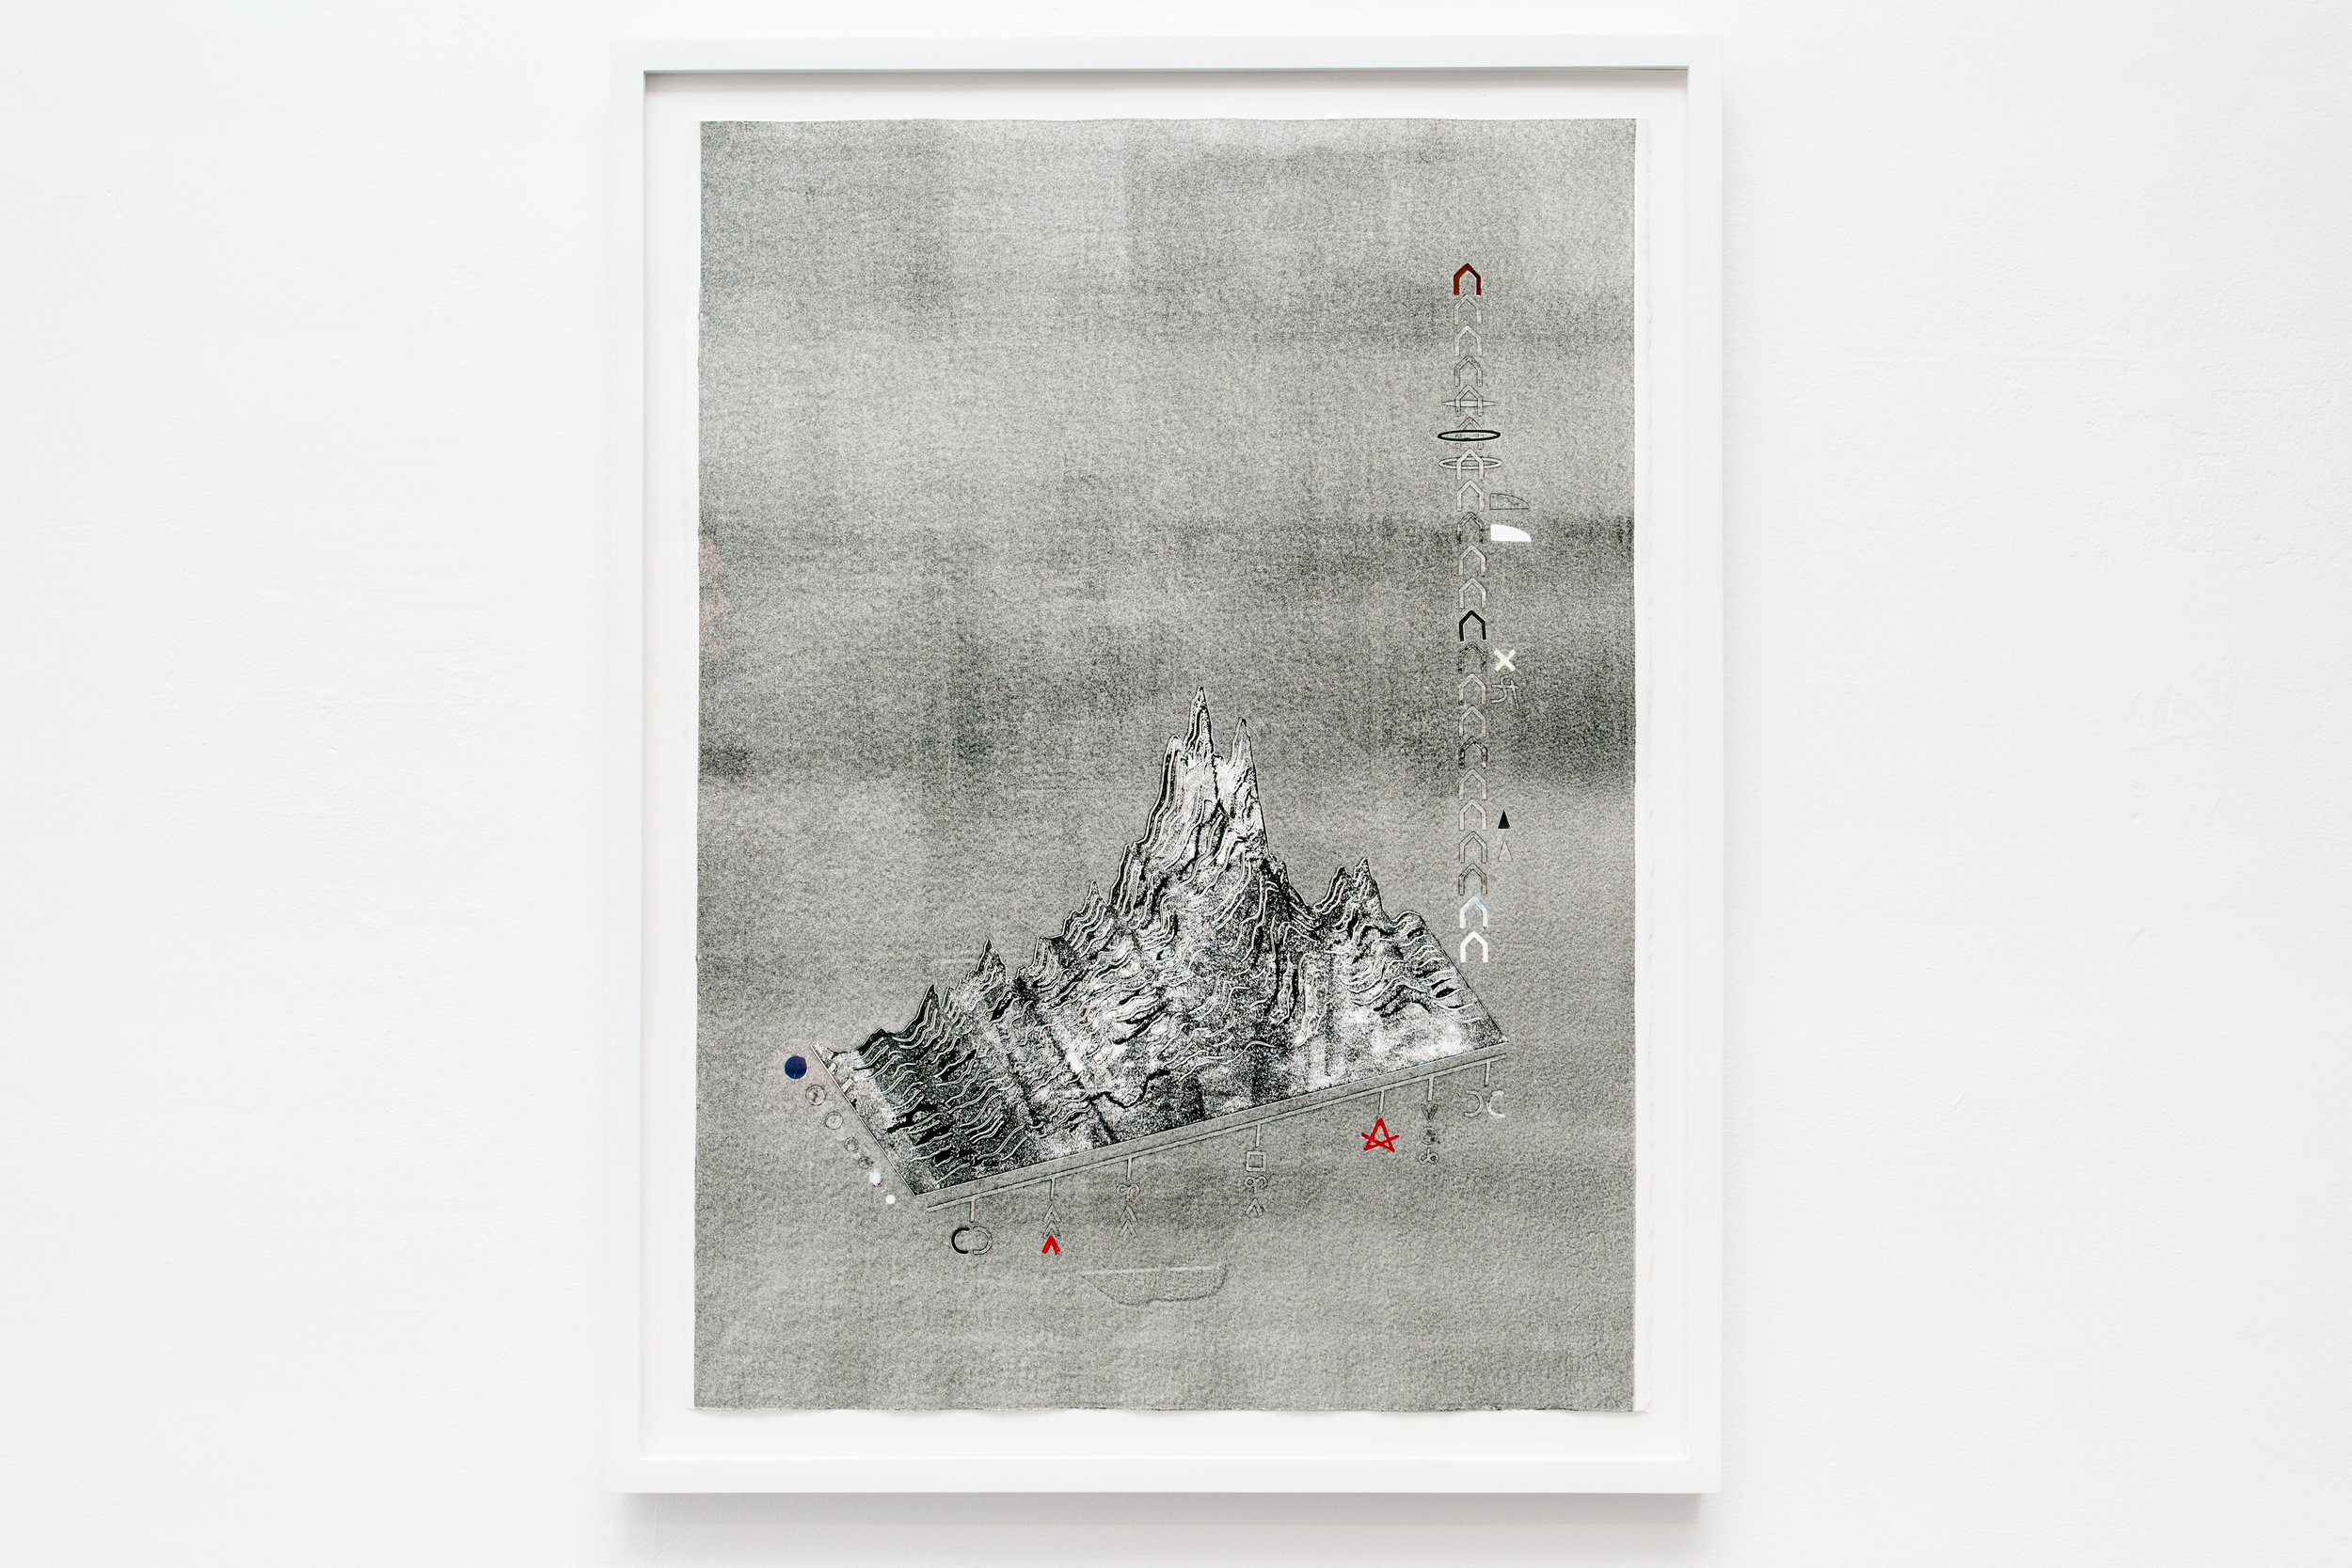 Darling schematic (diagram of a hypochondria spell), 2015, monotype print on Rives BFK, 22" x 30"